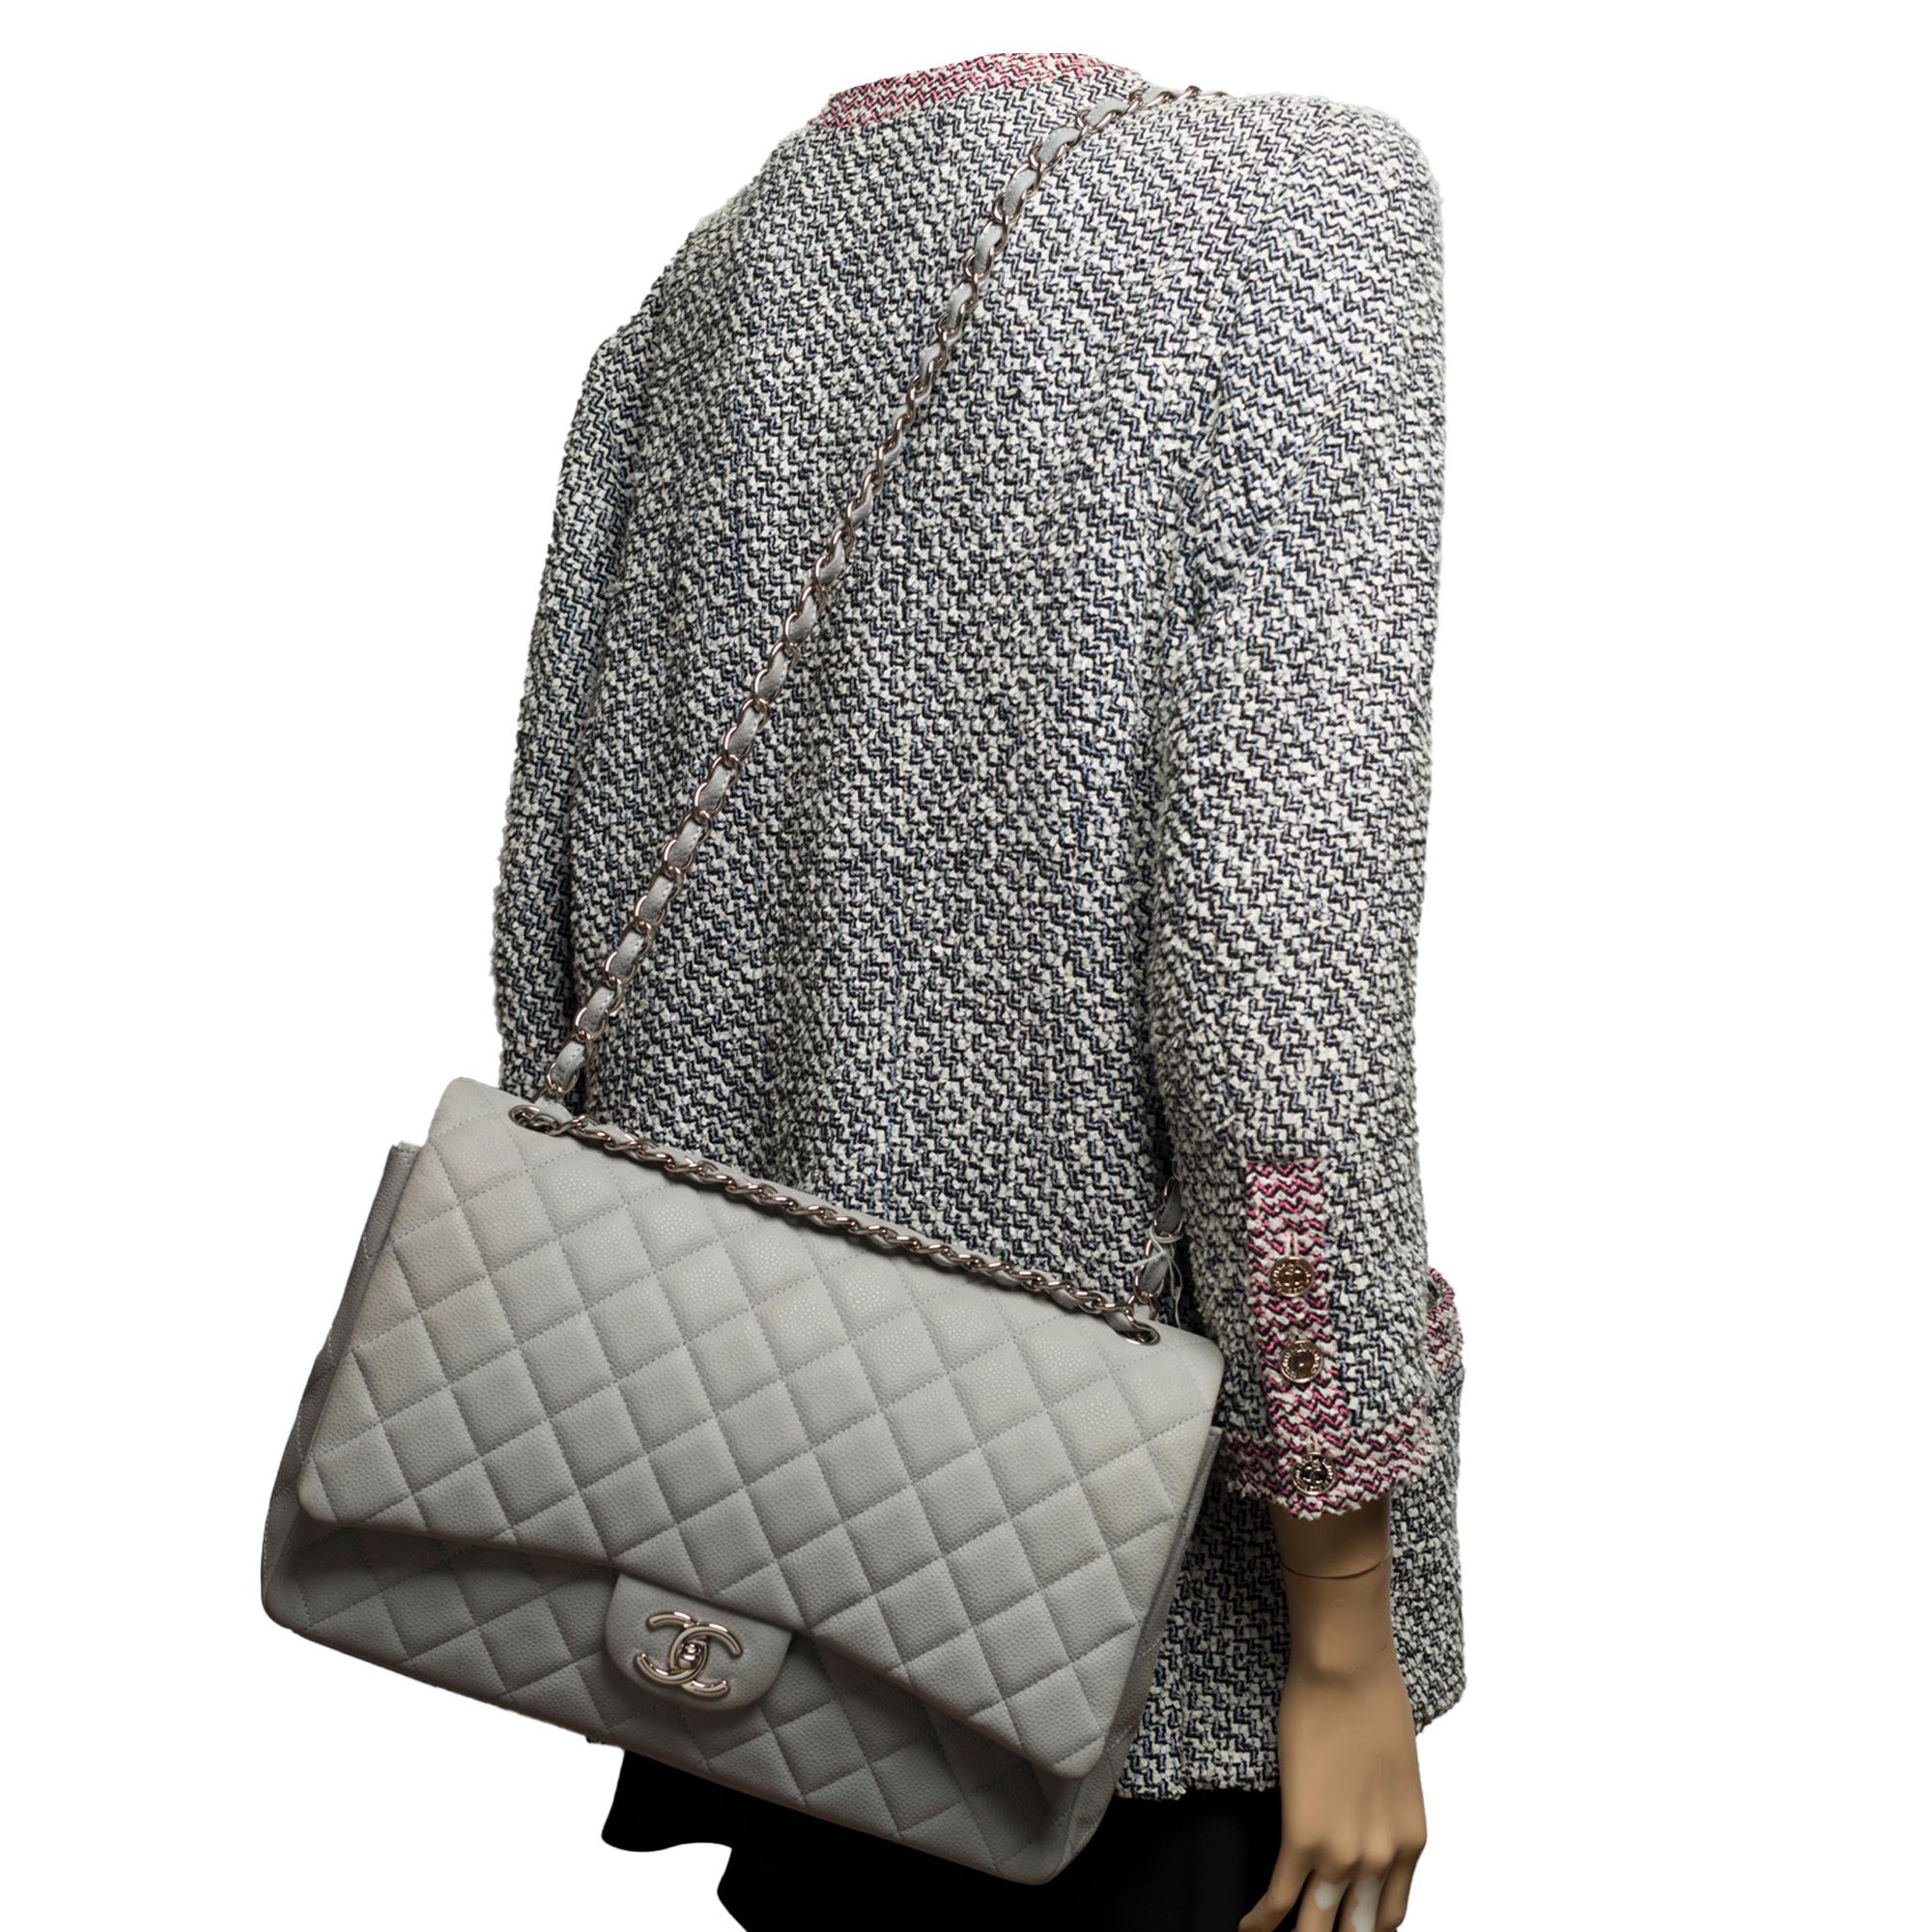 Chanel Timeless Maxi Jumbo shoulder bag in grey quilted caviar leather, SHW 6